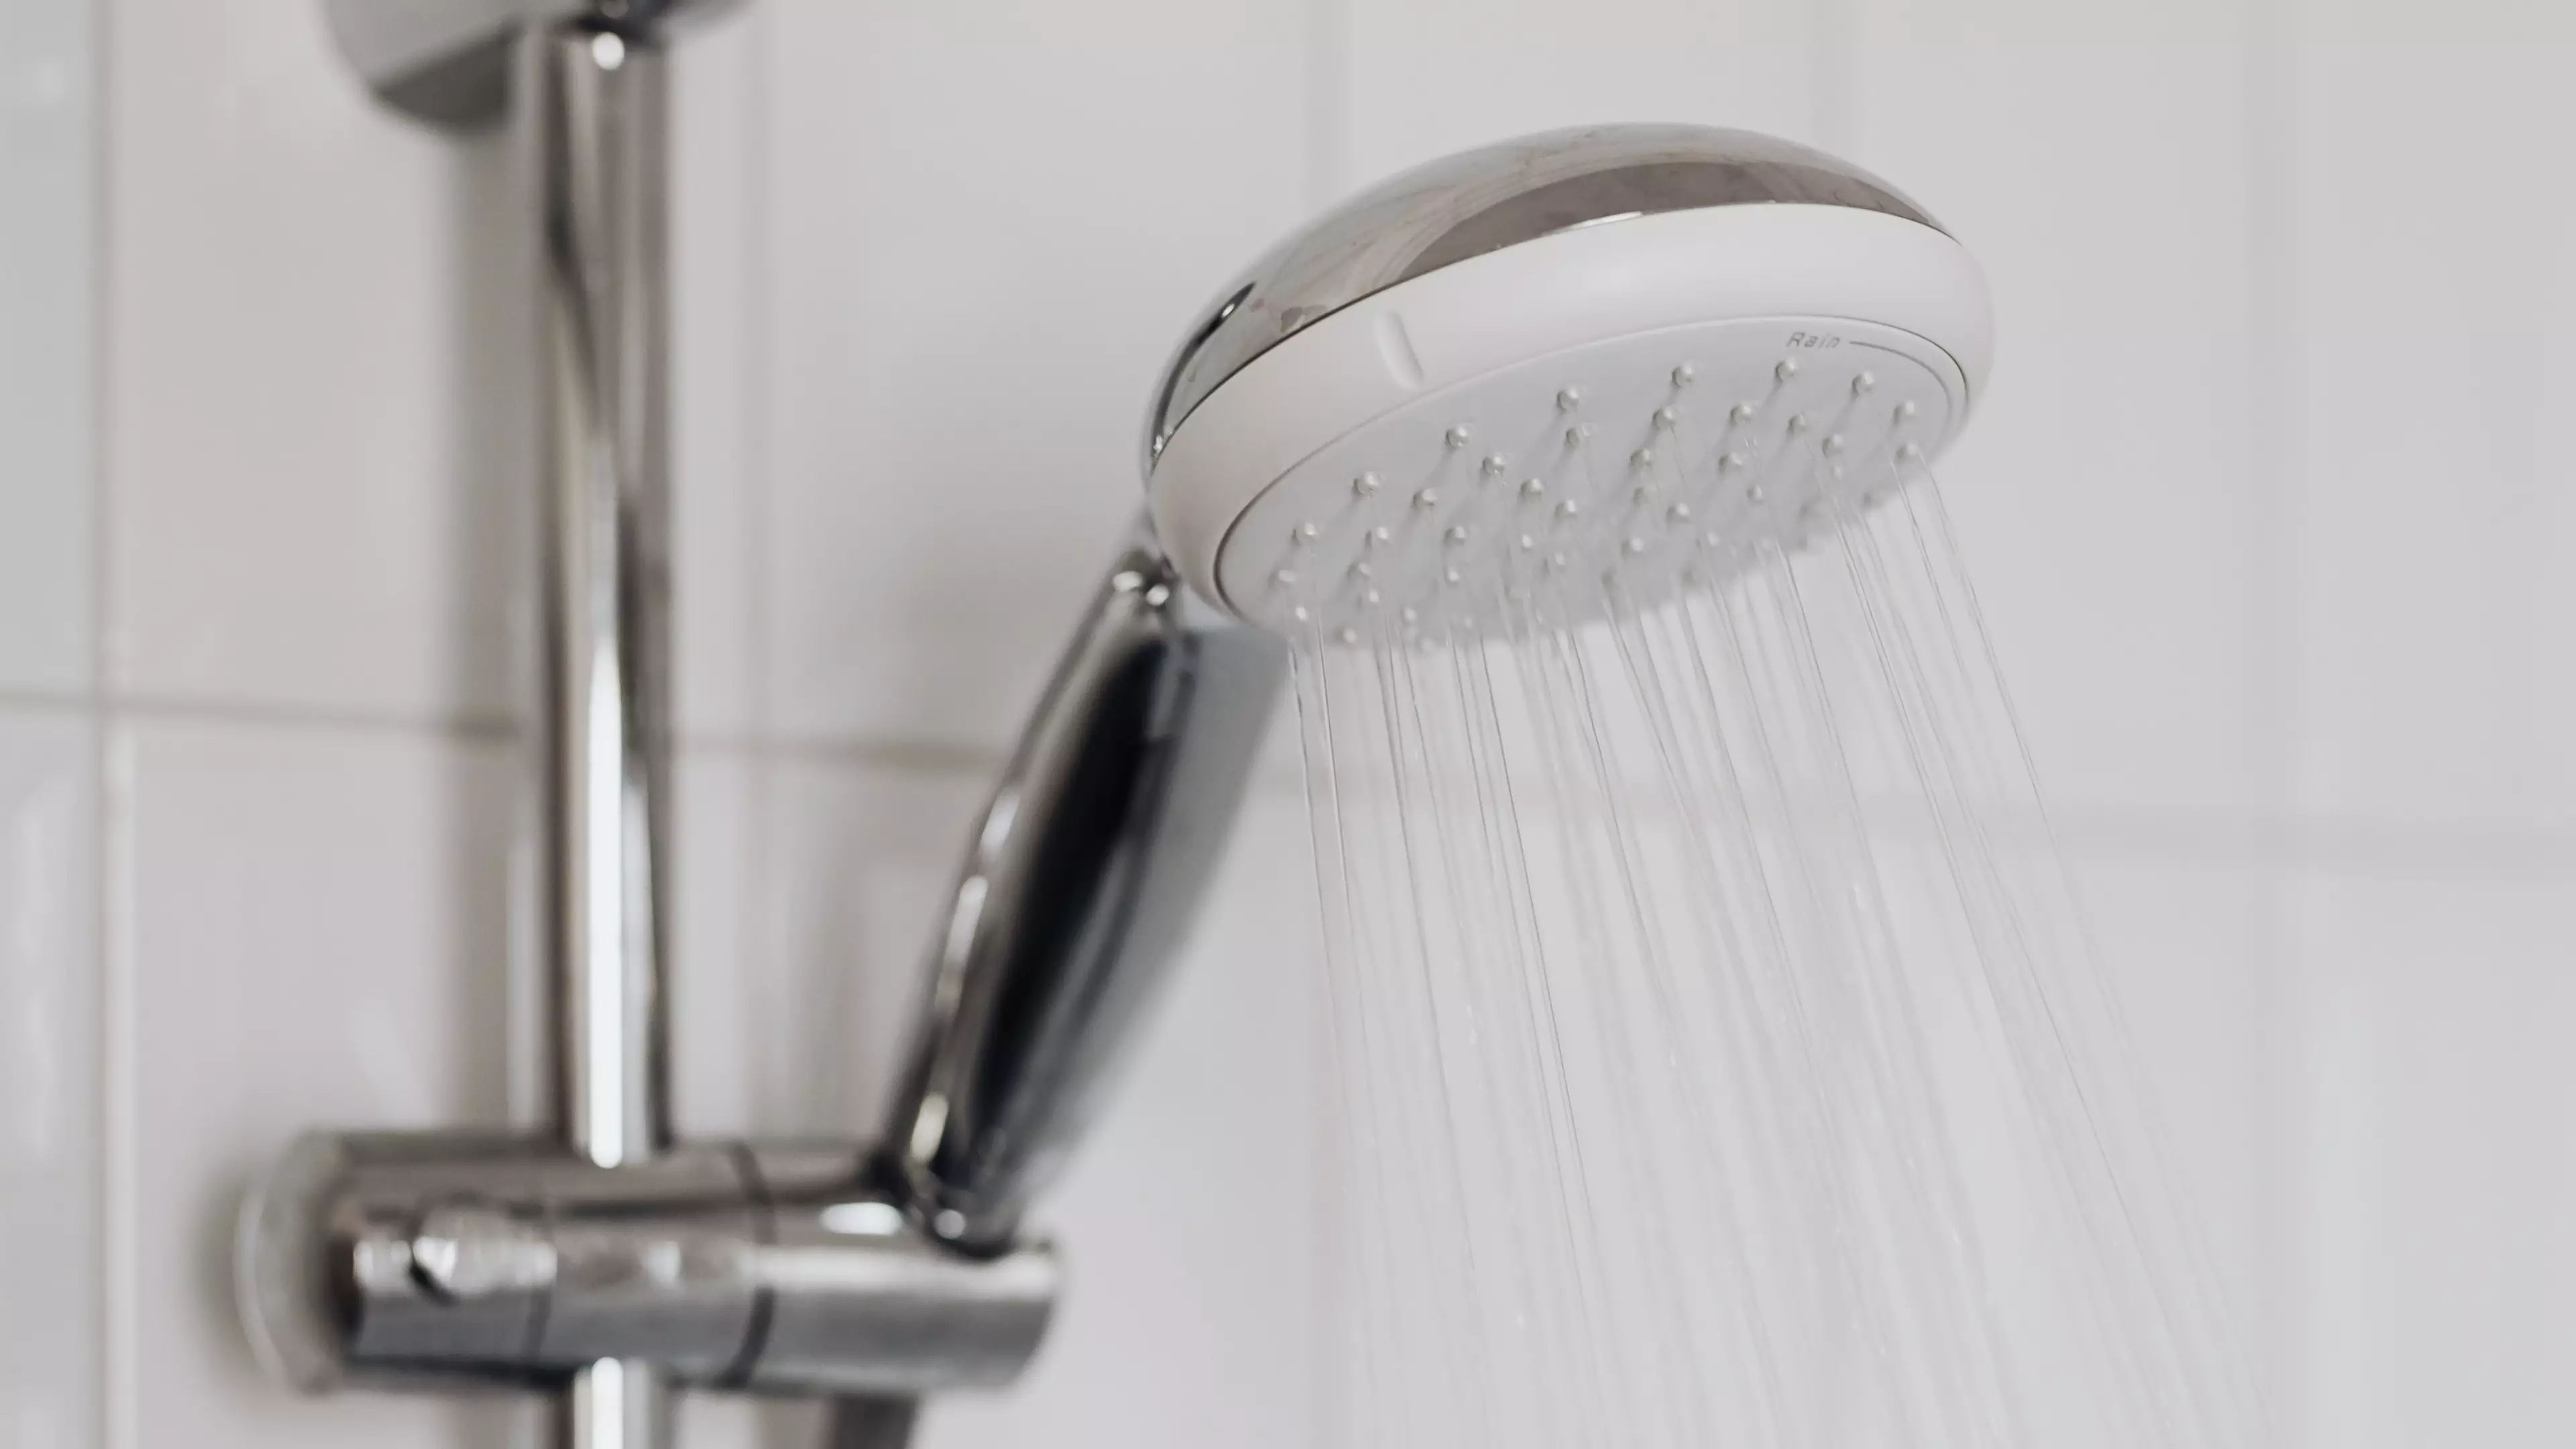 Doctor Issues Warning About Peeing In The Shower